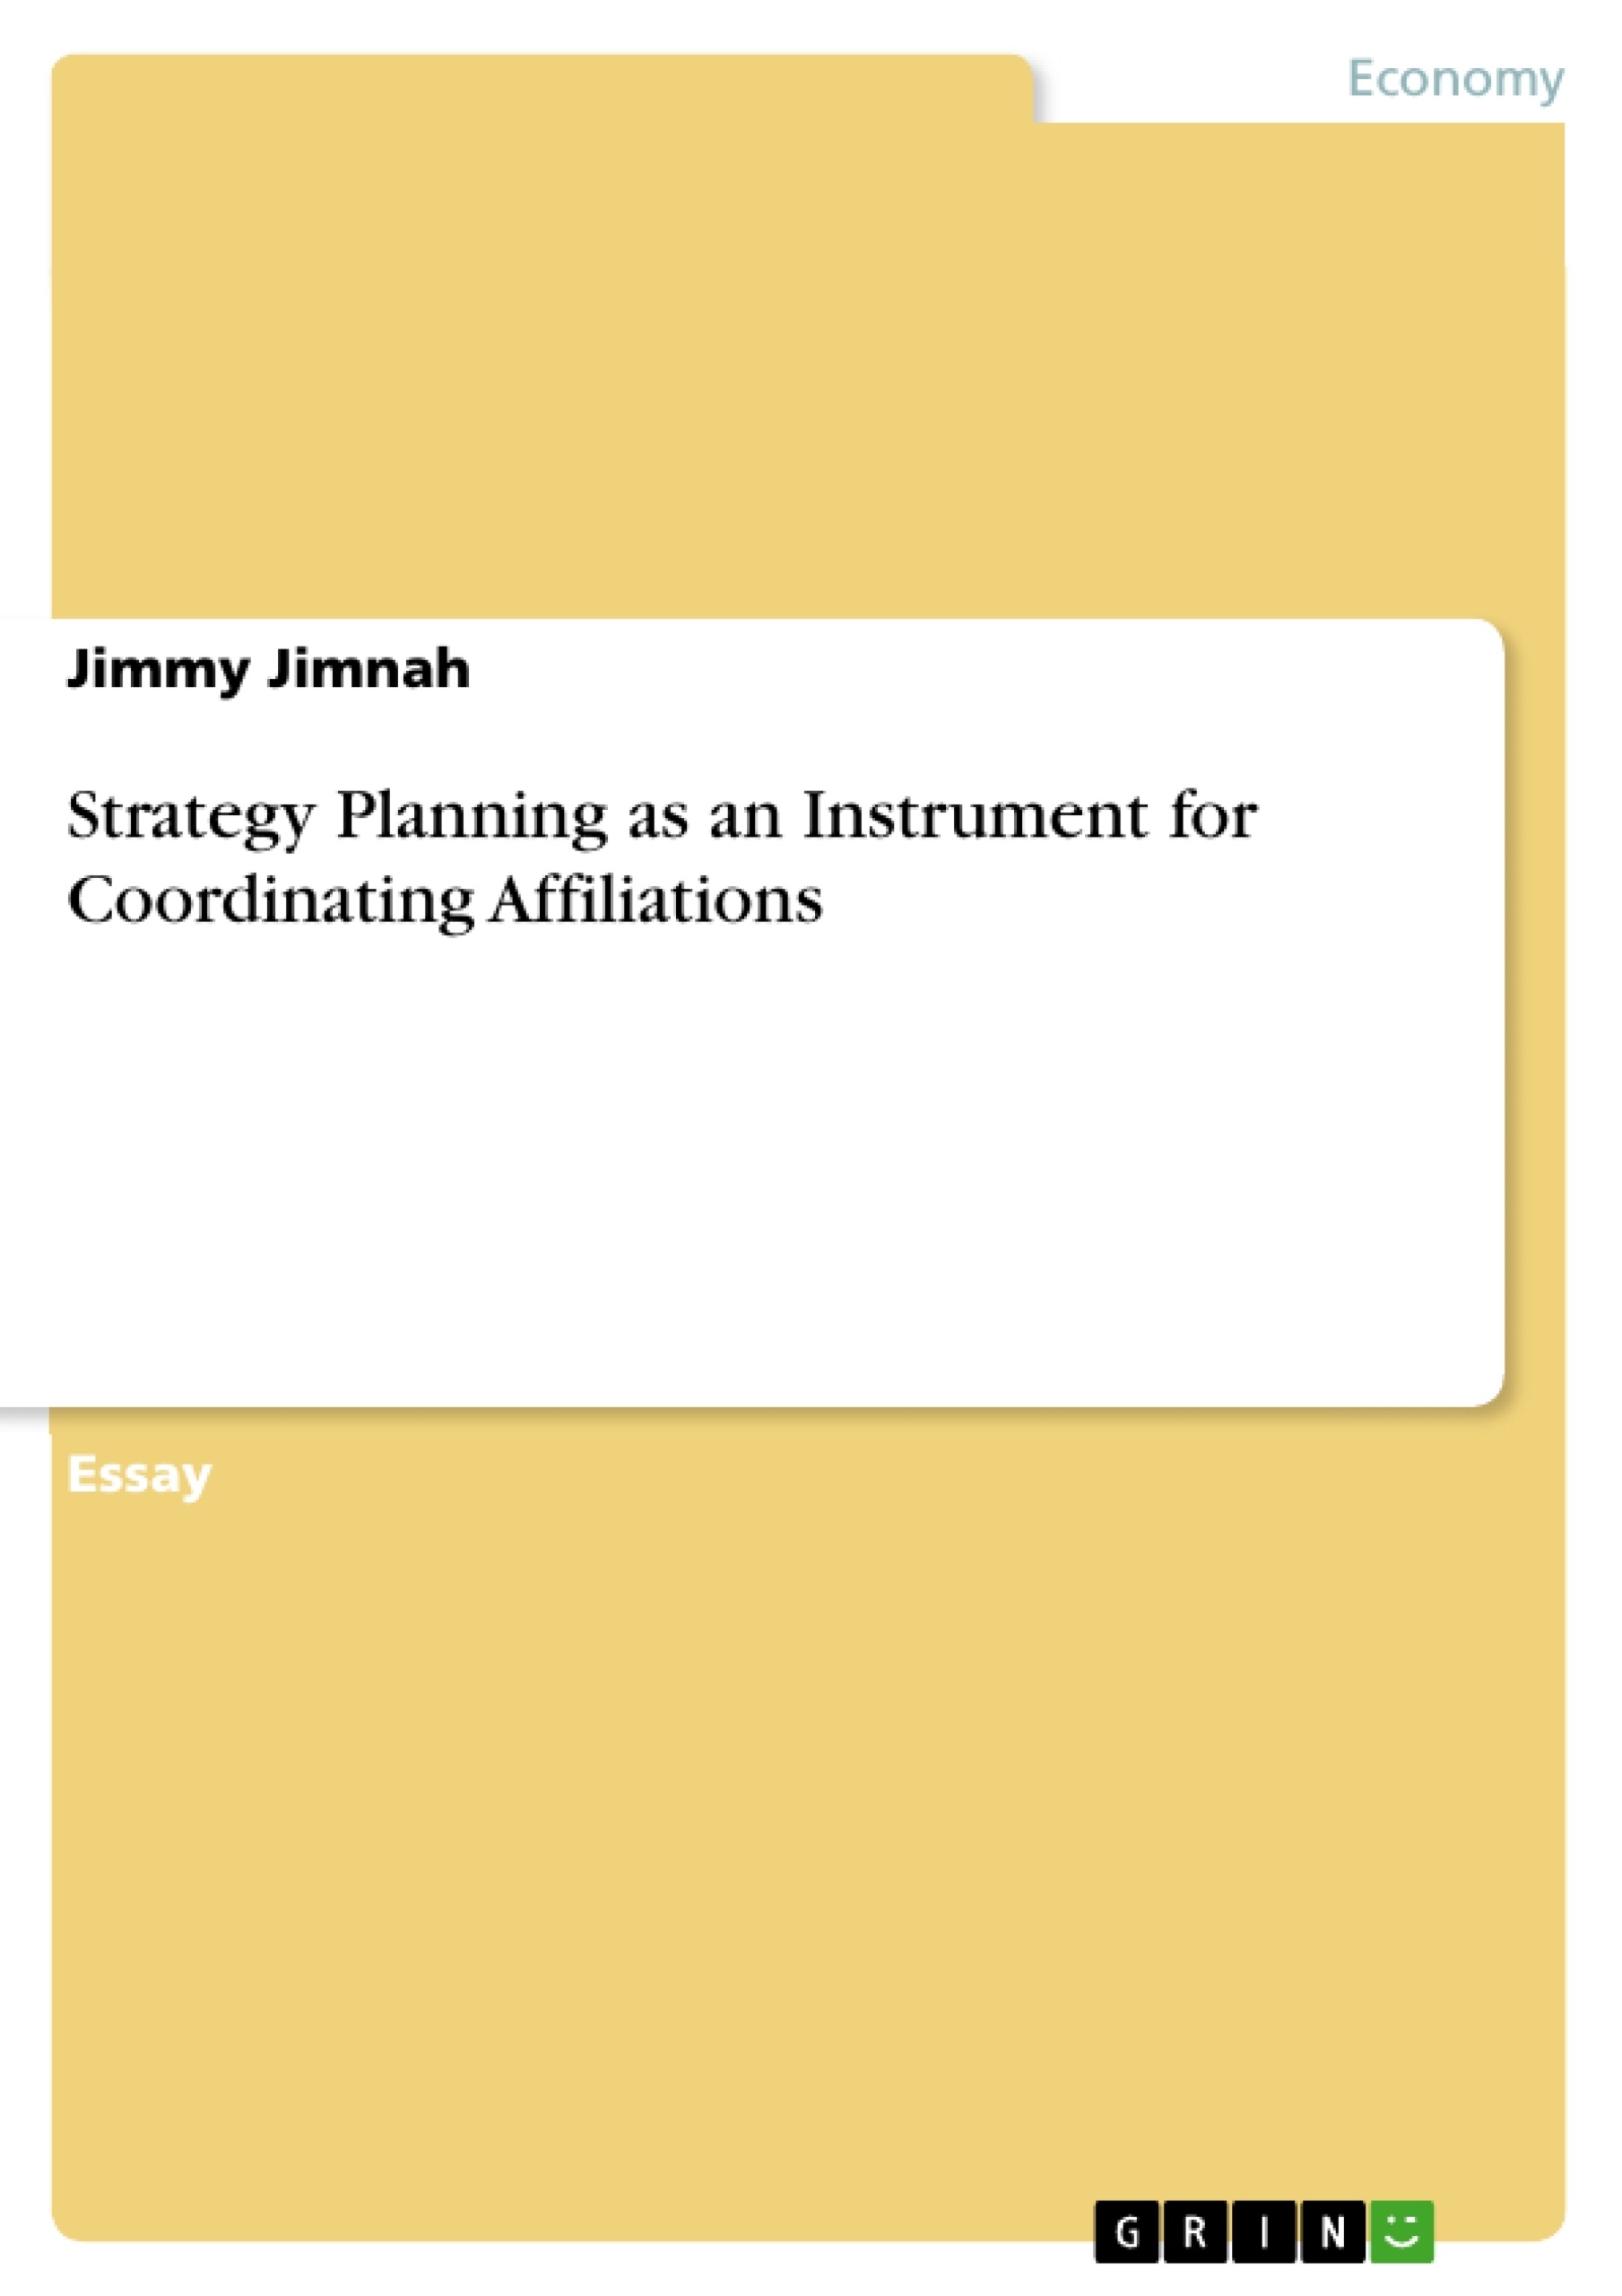 Title: Strategy Planning as an Instrument for Coordinating Affiliations